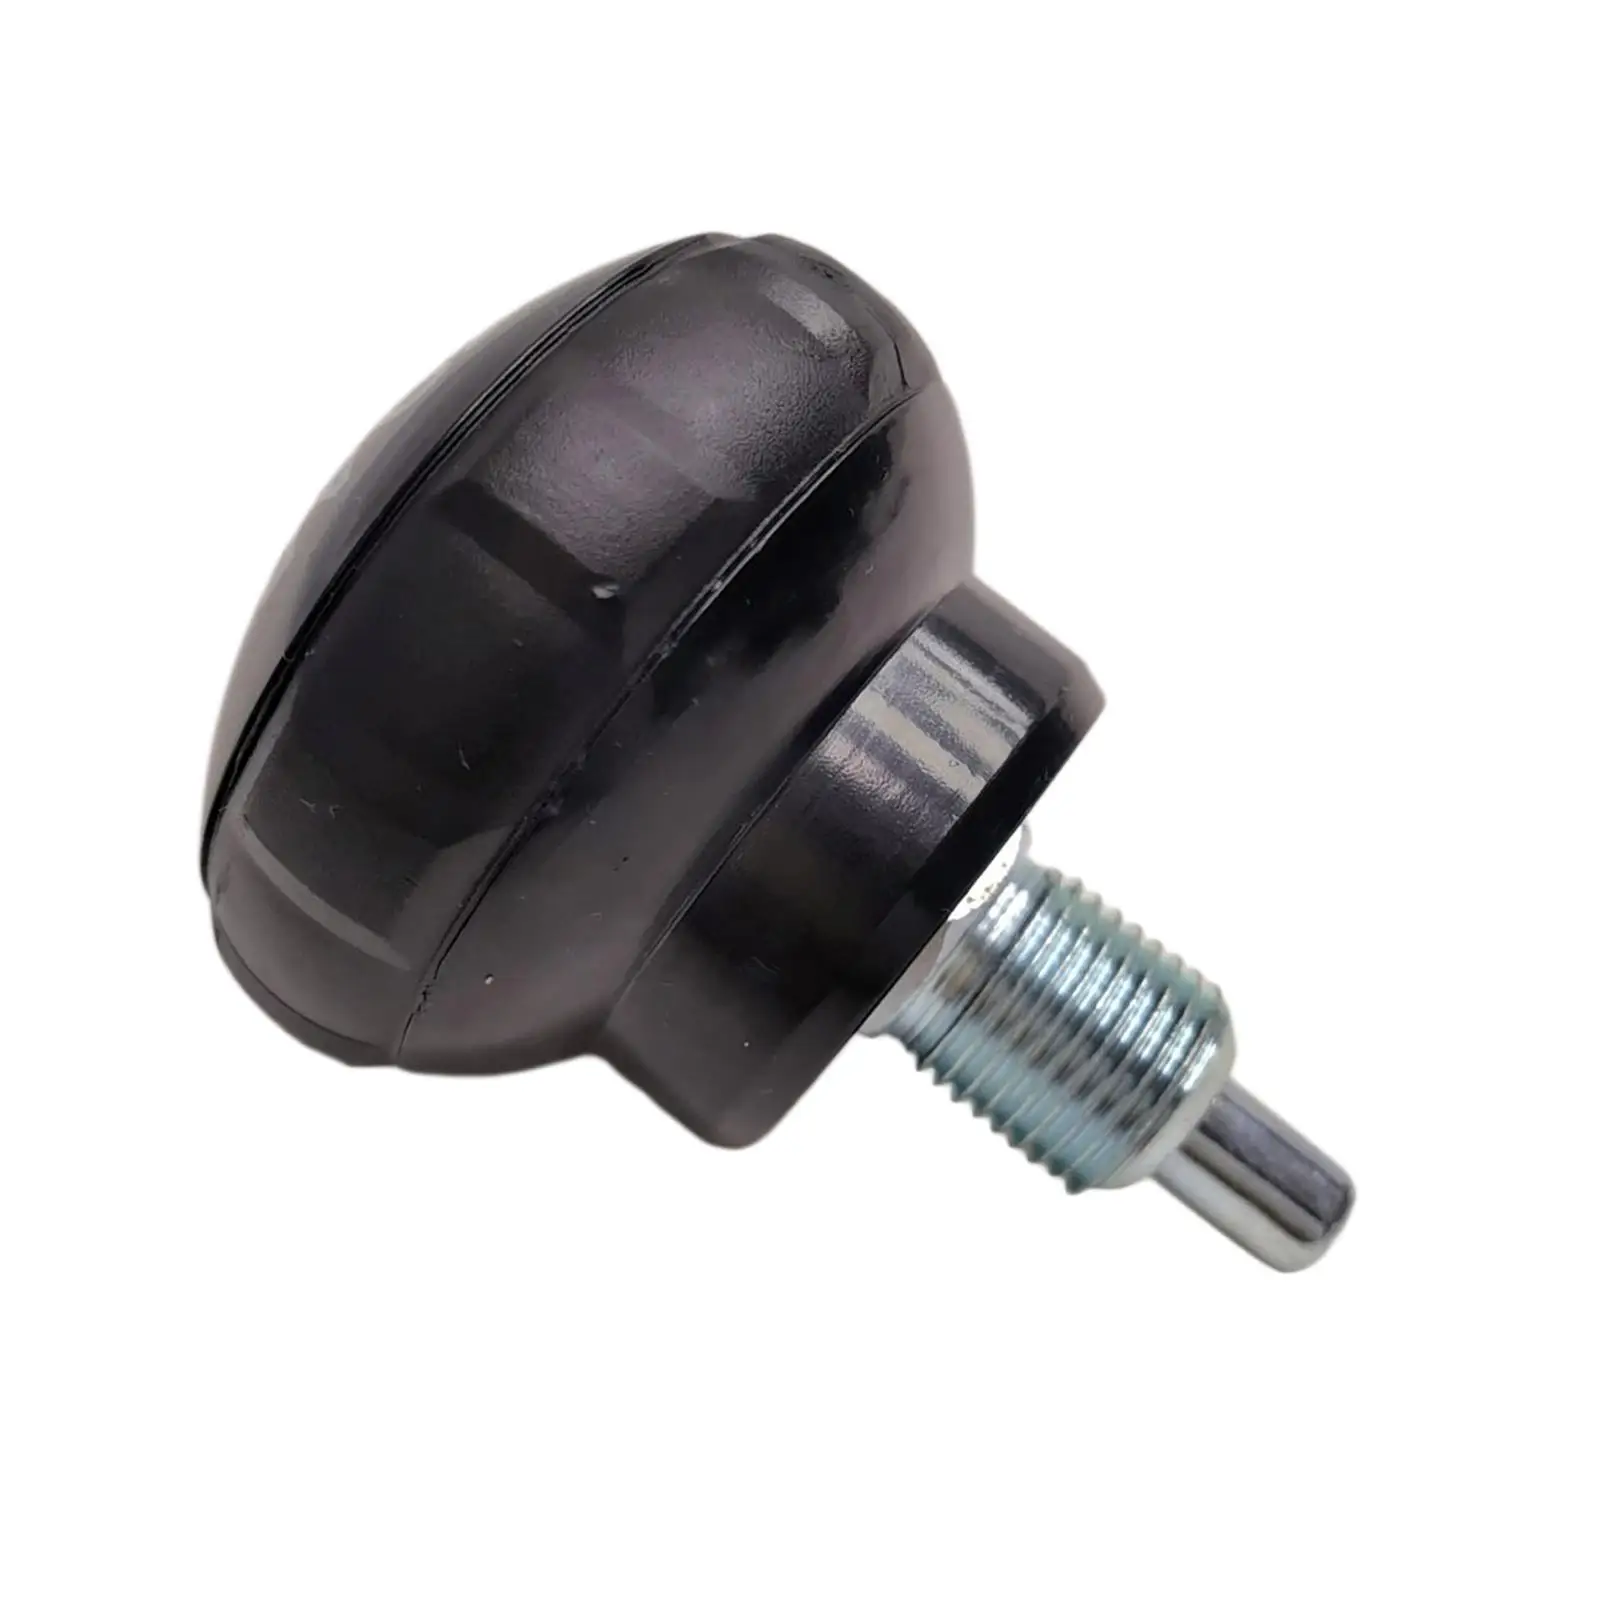 Pull Pin Spring Knob Fitness Bike Replacement M16 Adjustment Accs Durable Heavy Duty Maintenance Screw Pull up Knob Equipment